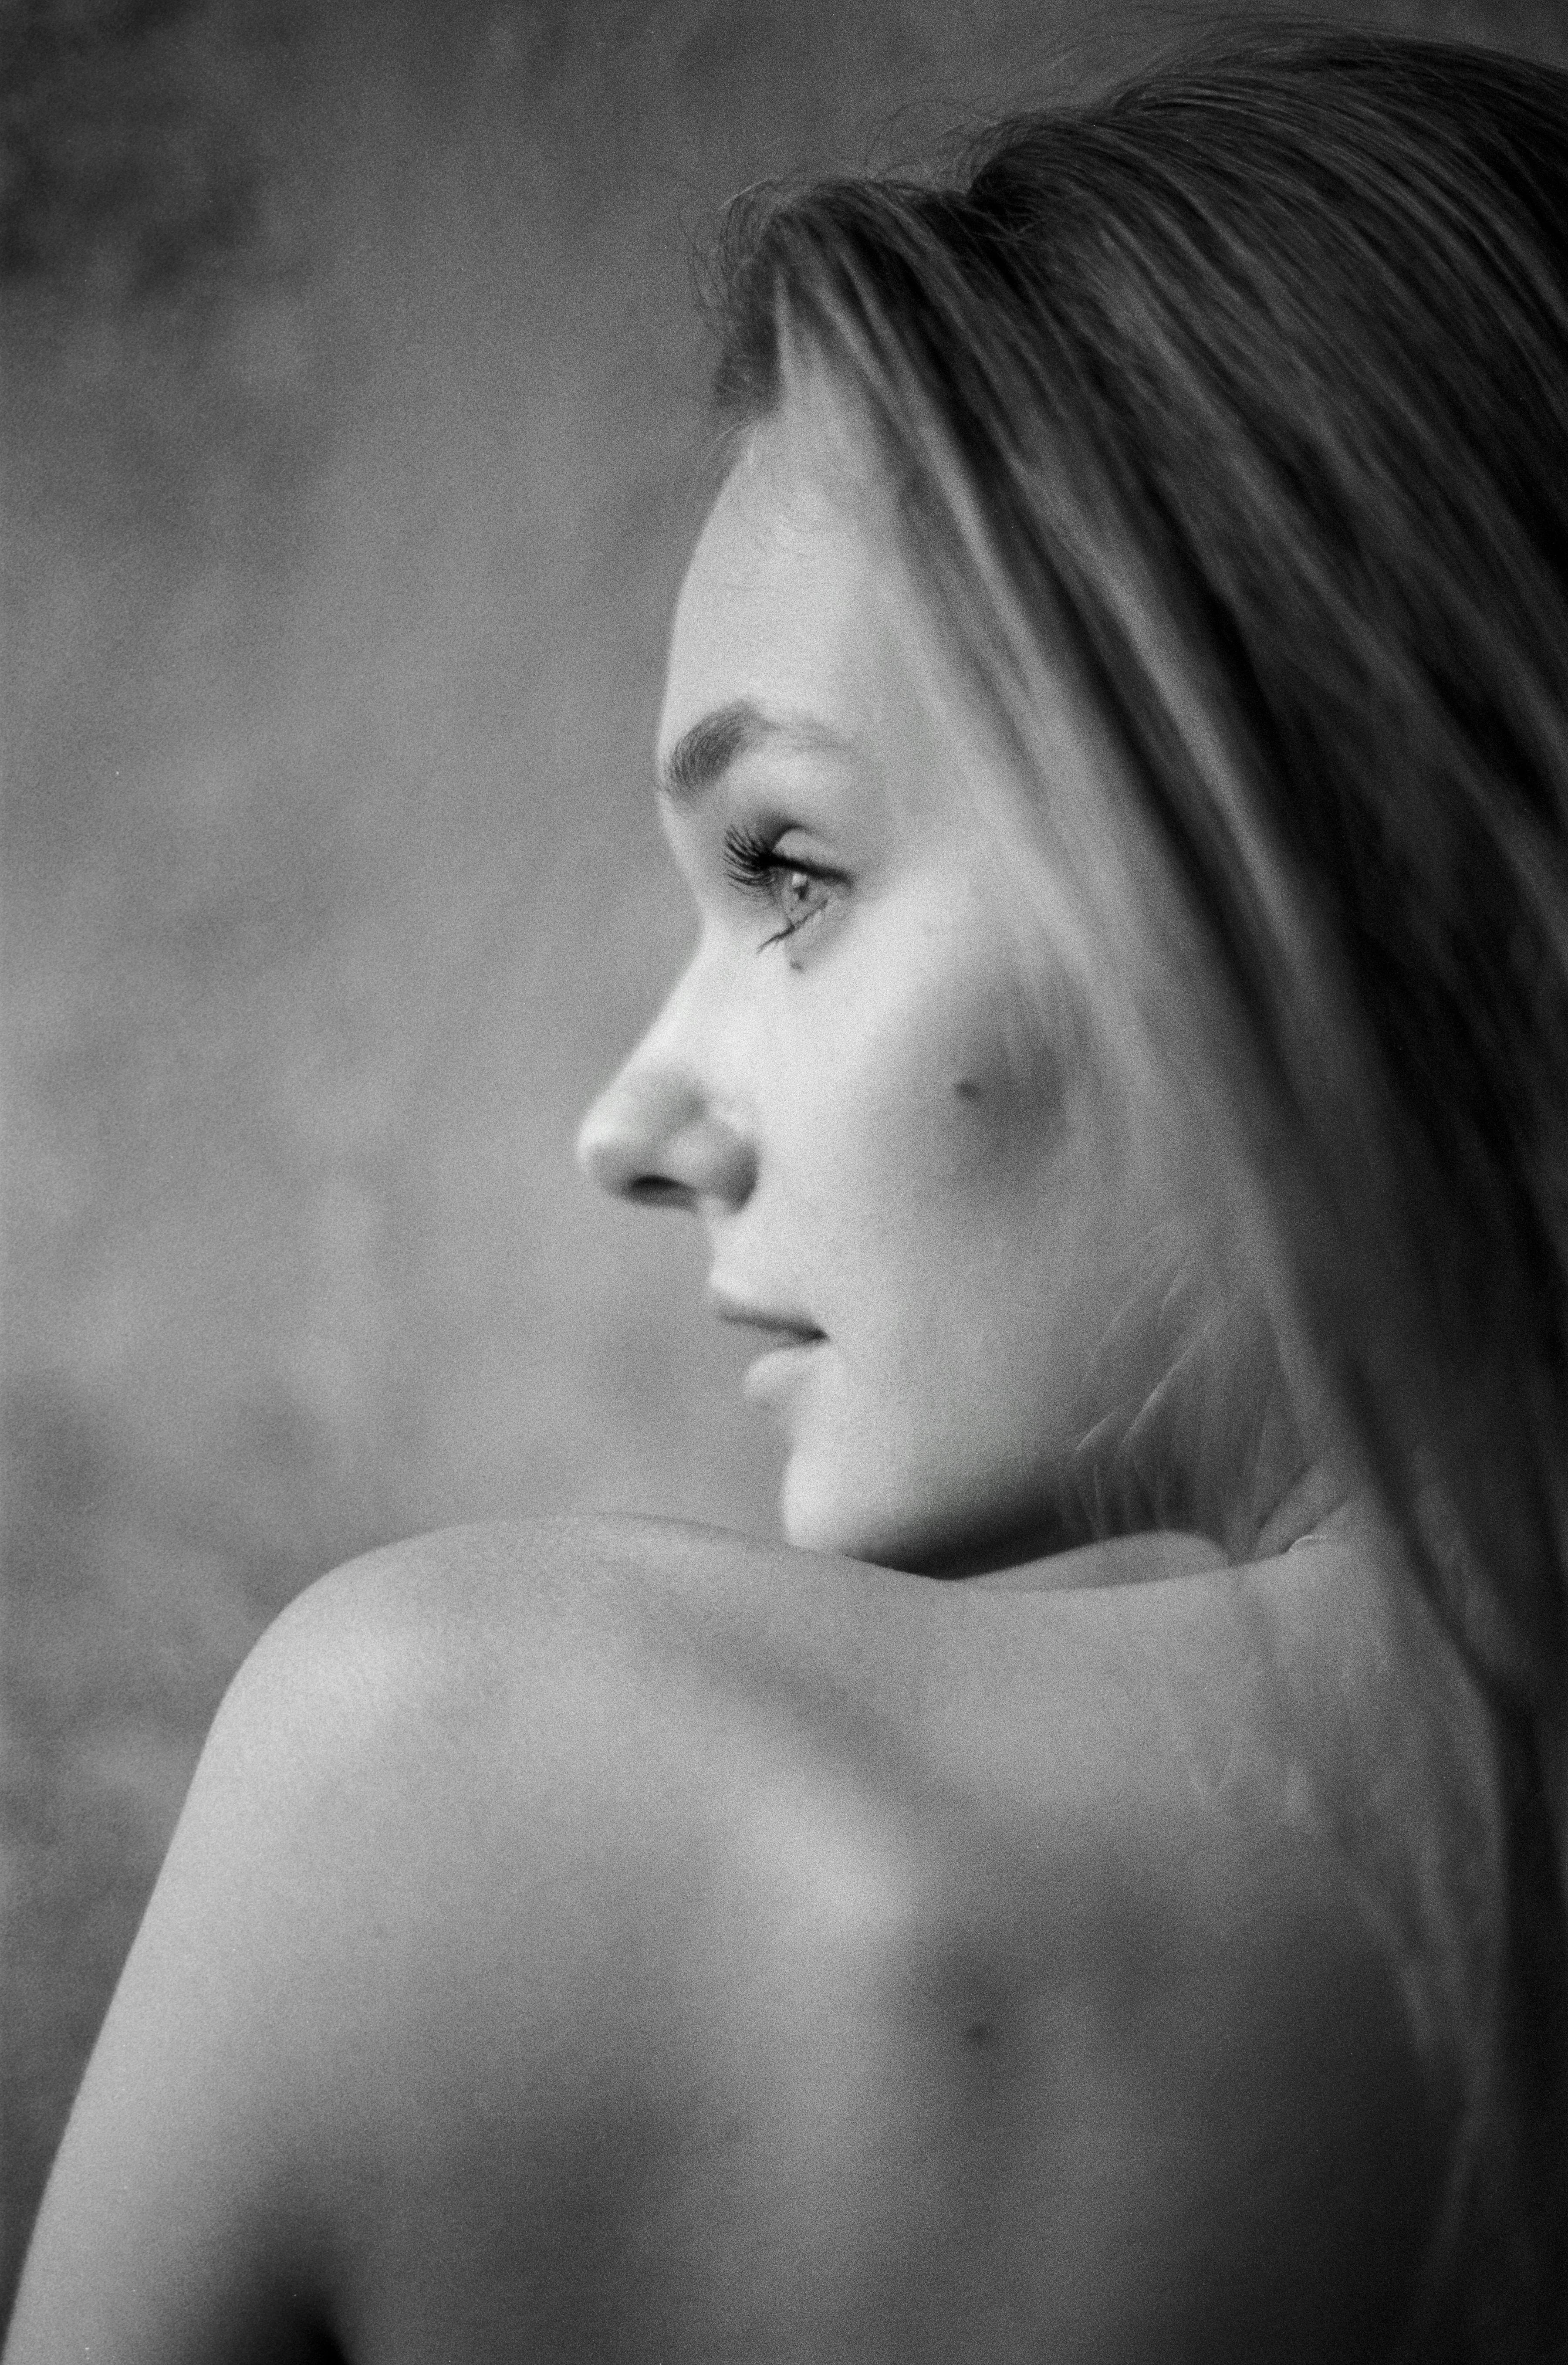 black and white profile view portrait of woman